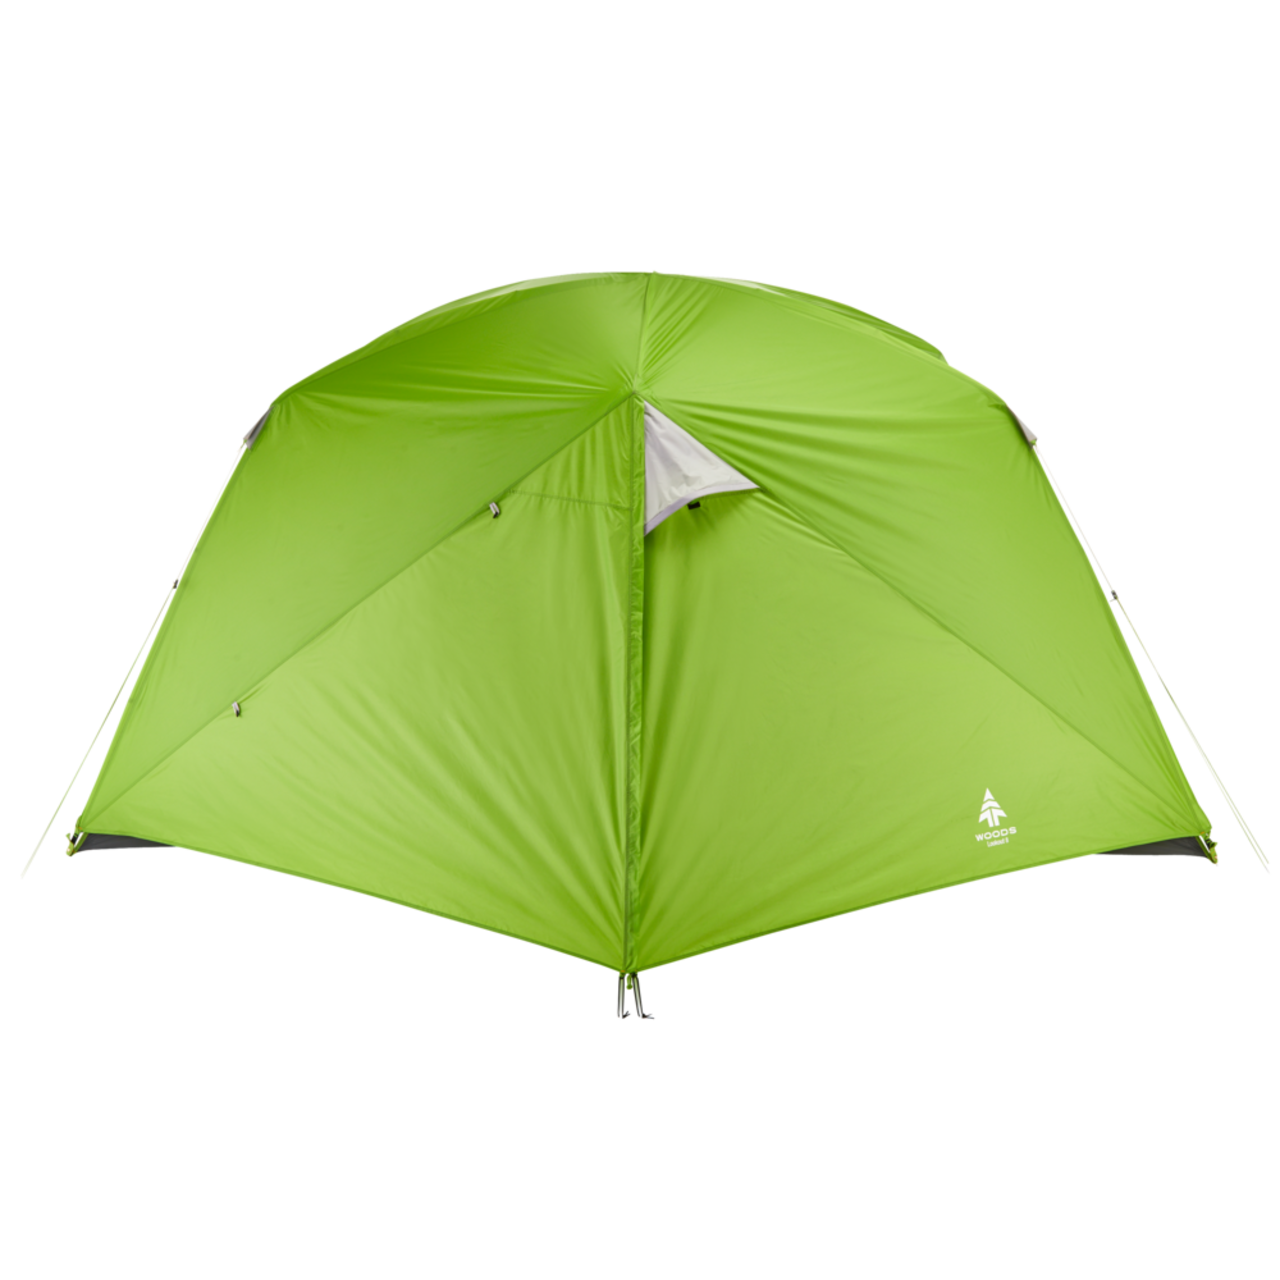 Woods Lookout 3-Season, 8-Person Camping Dome Tent